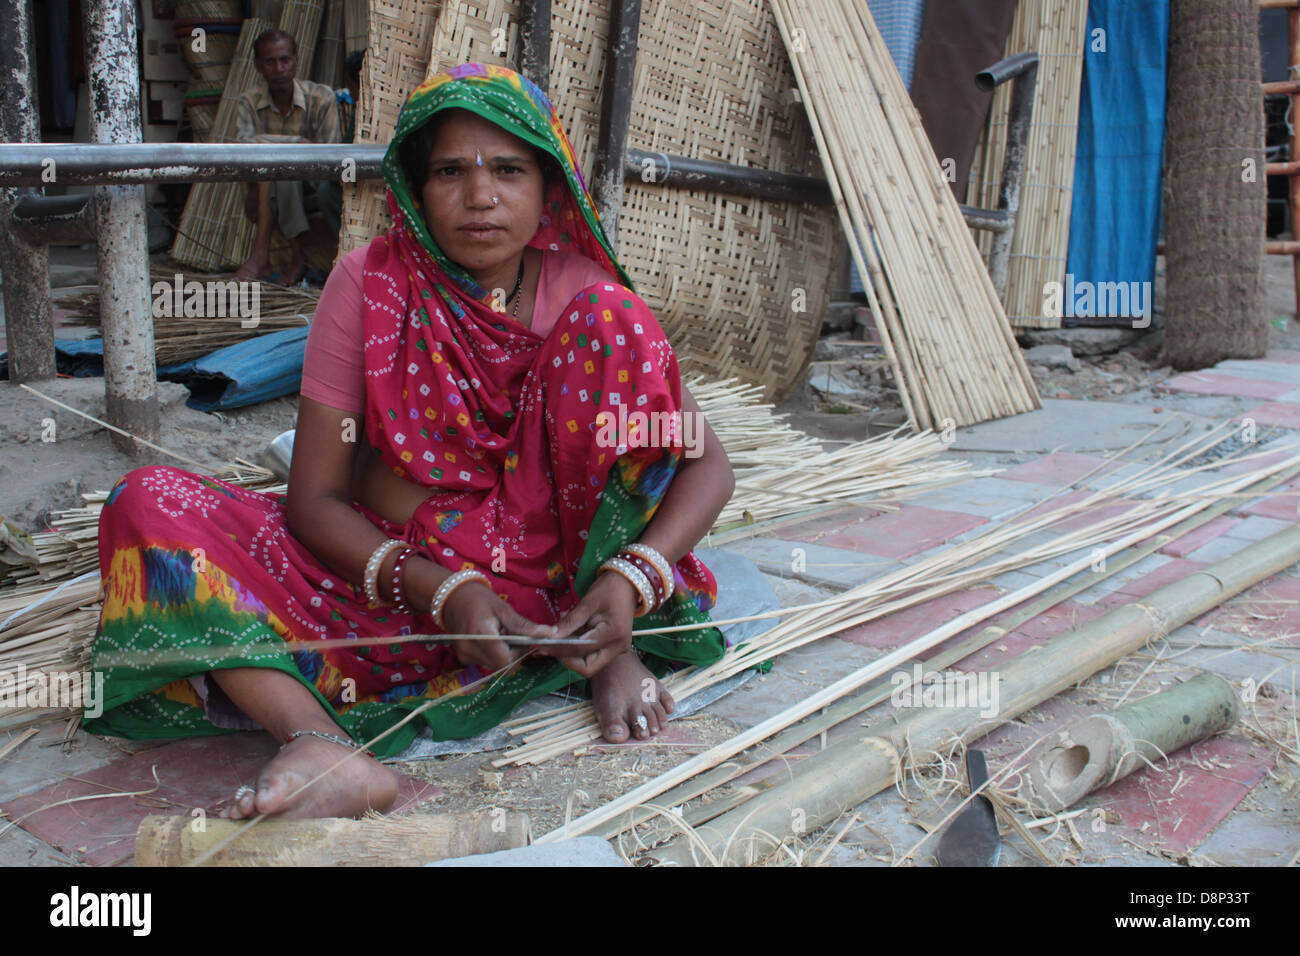 A woman worker slits bamboos to make curtains on a pavement in Old Delhi, India. Stock Photo